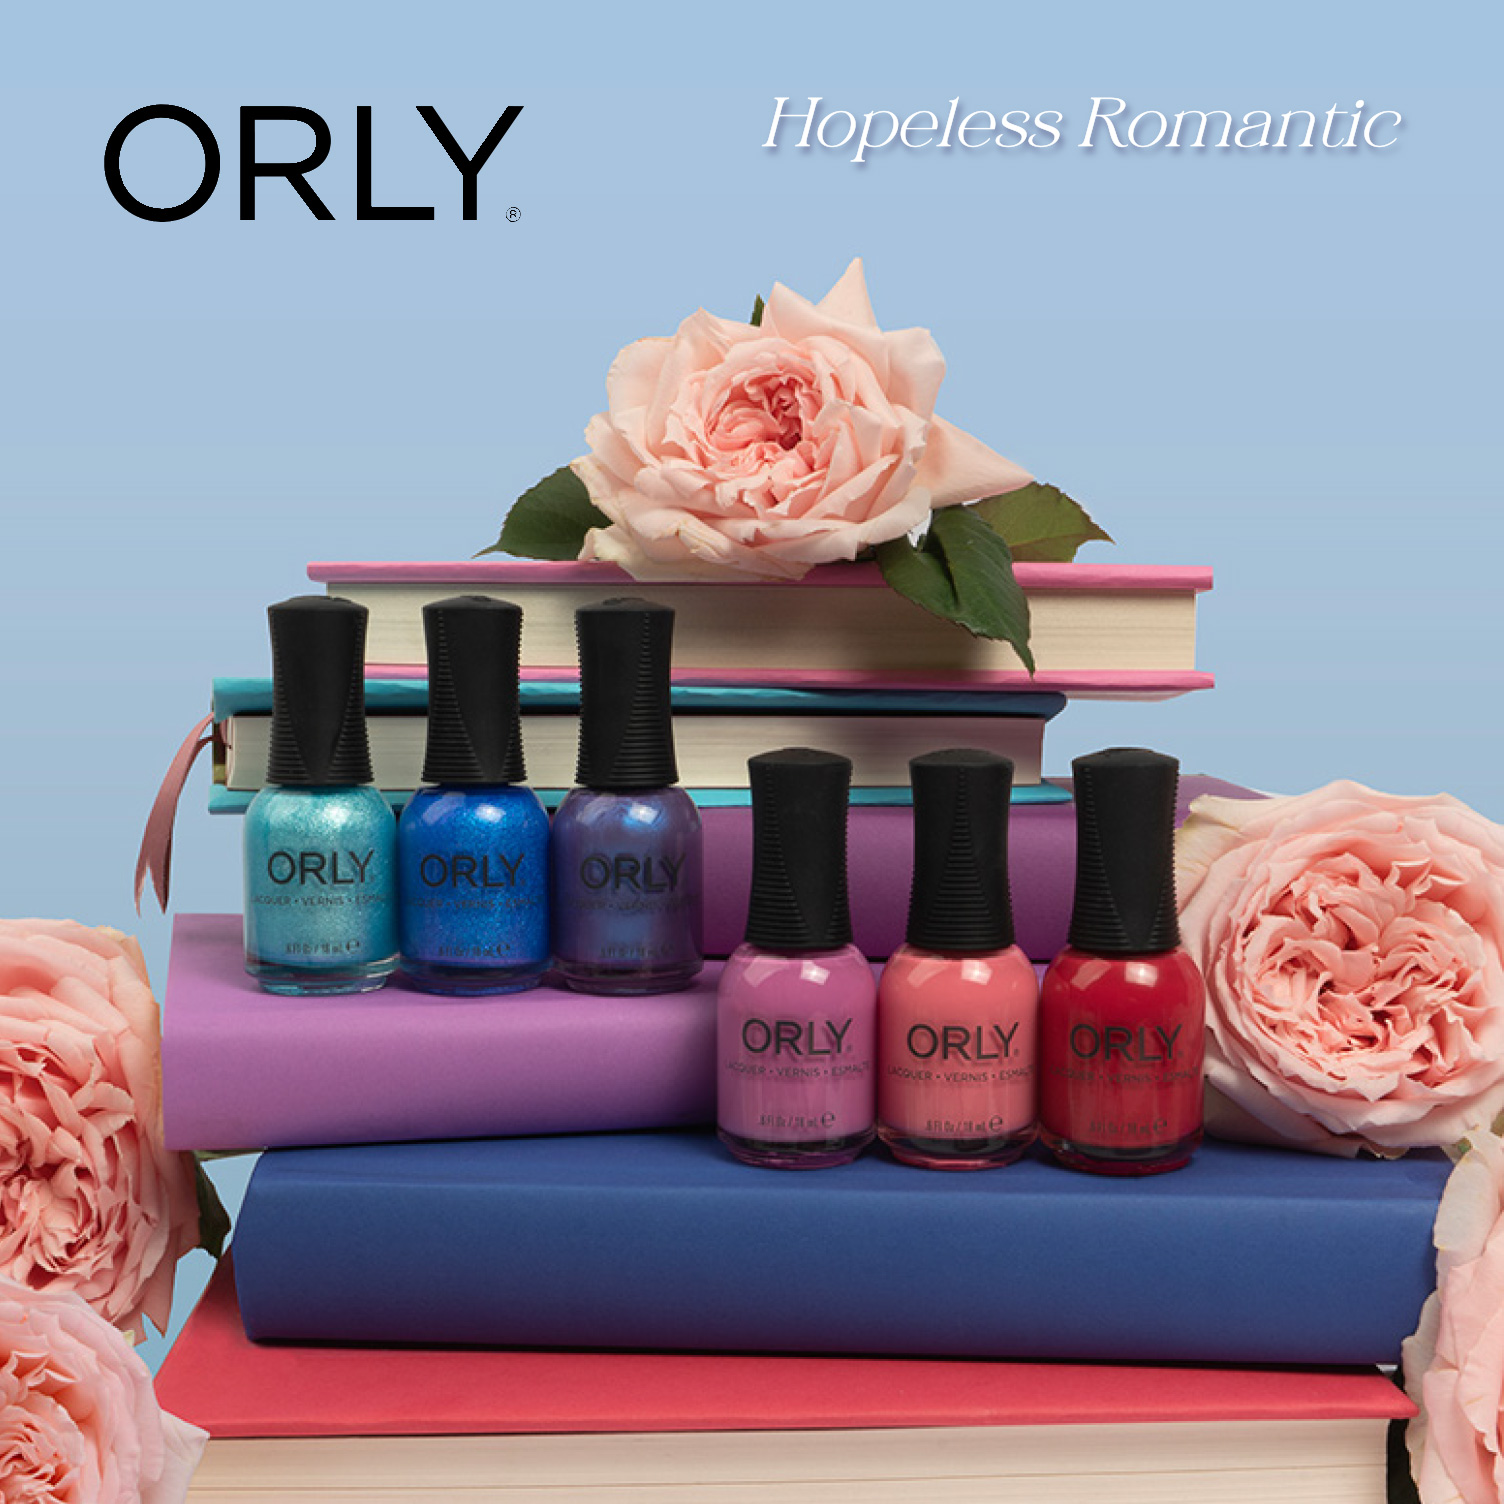 Orly Hopeless Romantic Collection